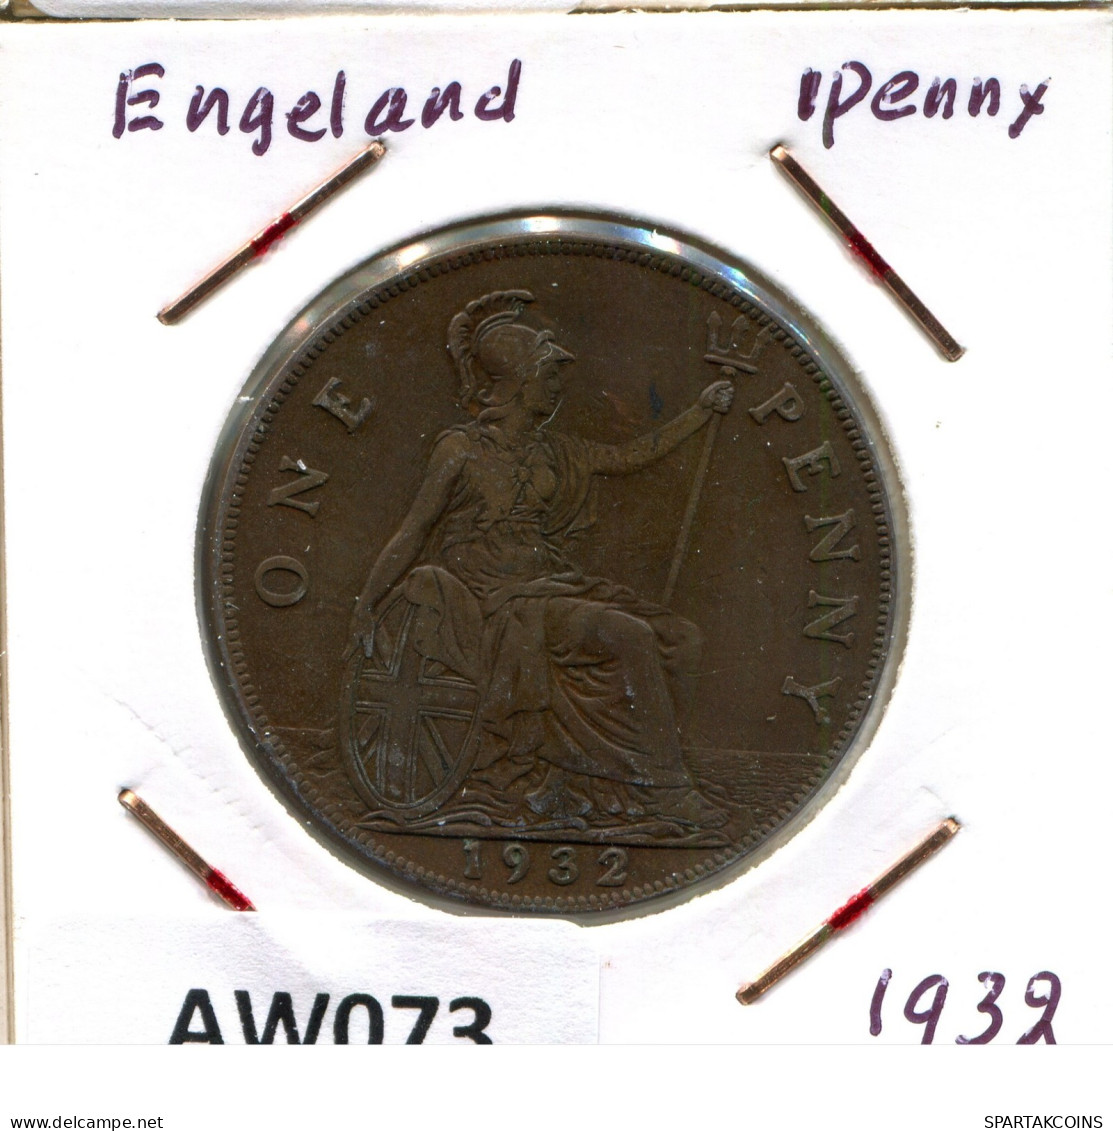 PENNY 1932 UK GREAT BRITAIN Coin #AW073.U.A - D. 1 Penny